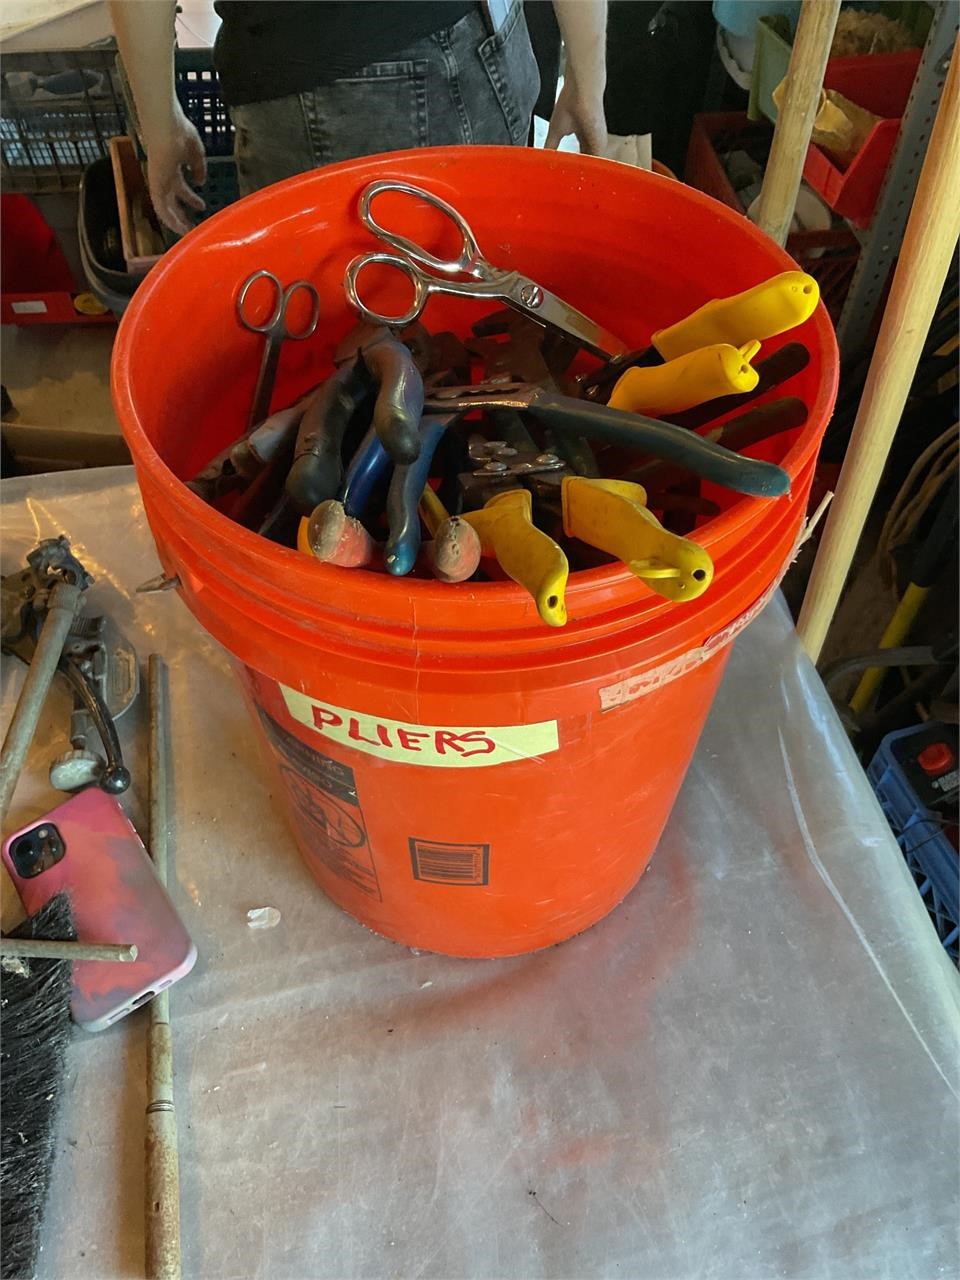 Bucket lot full of pliers and wire cutters